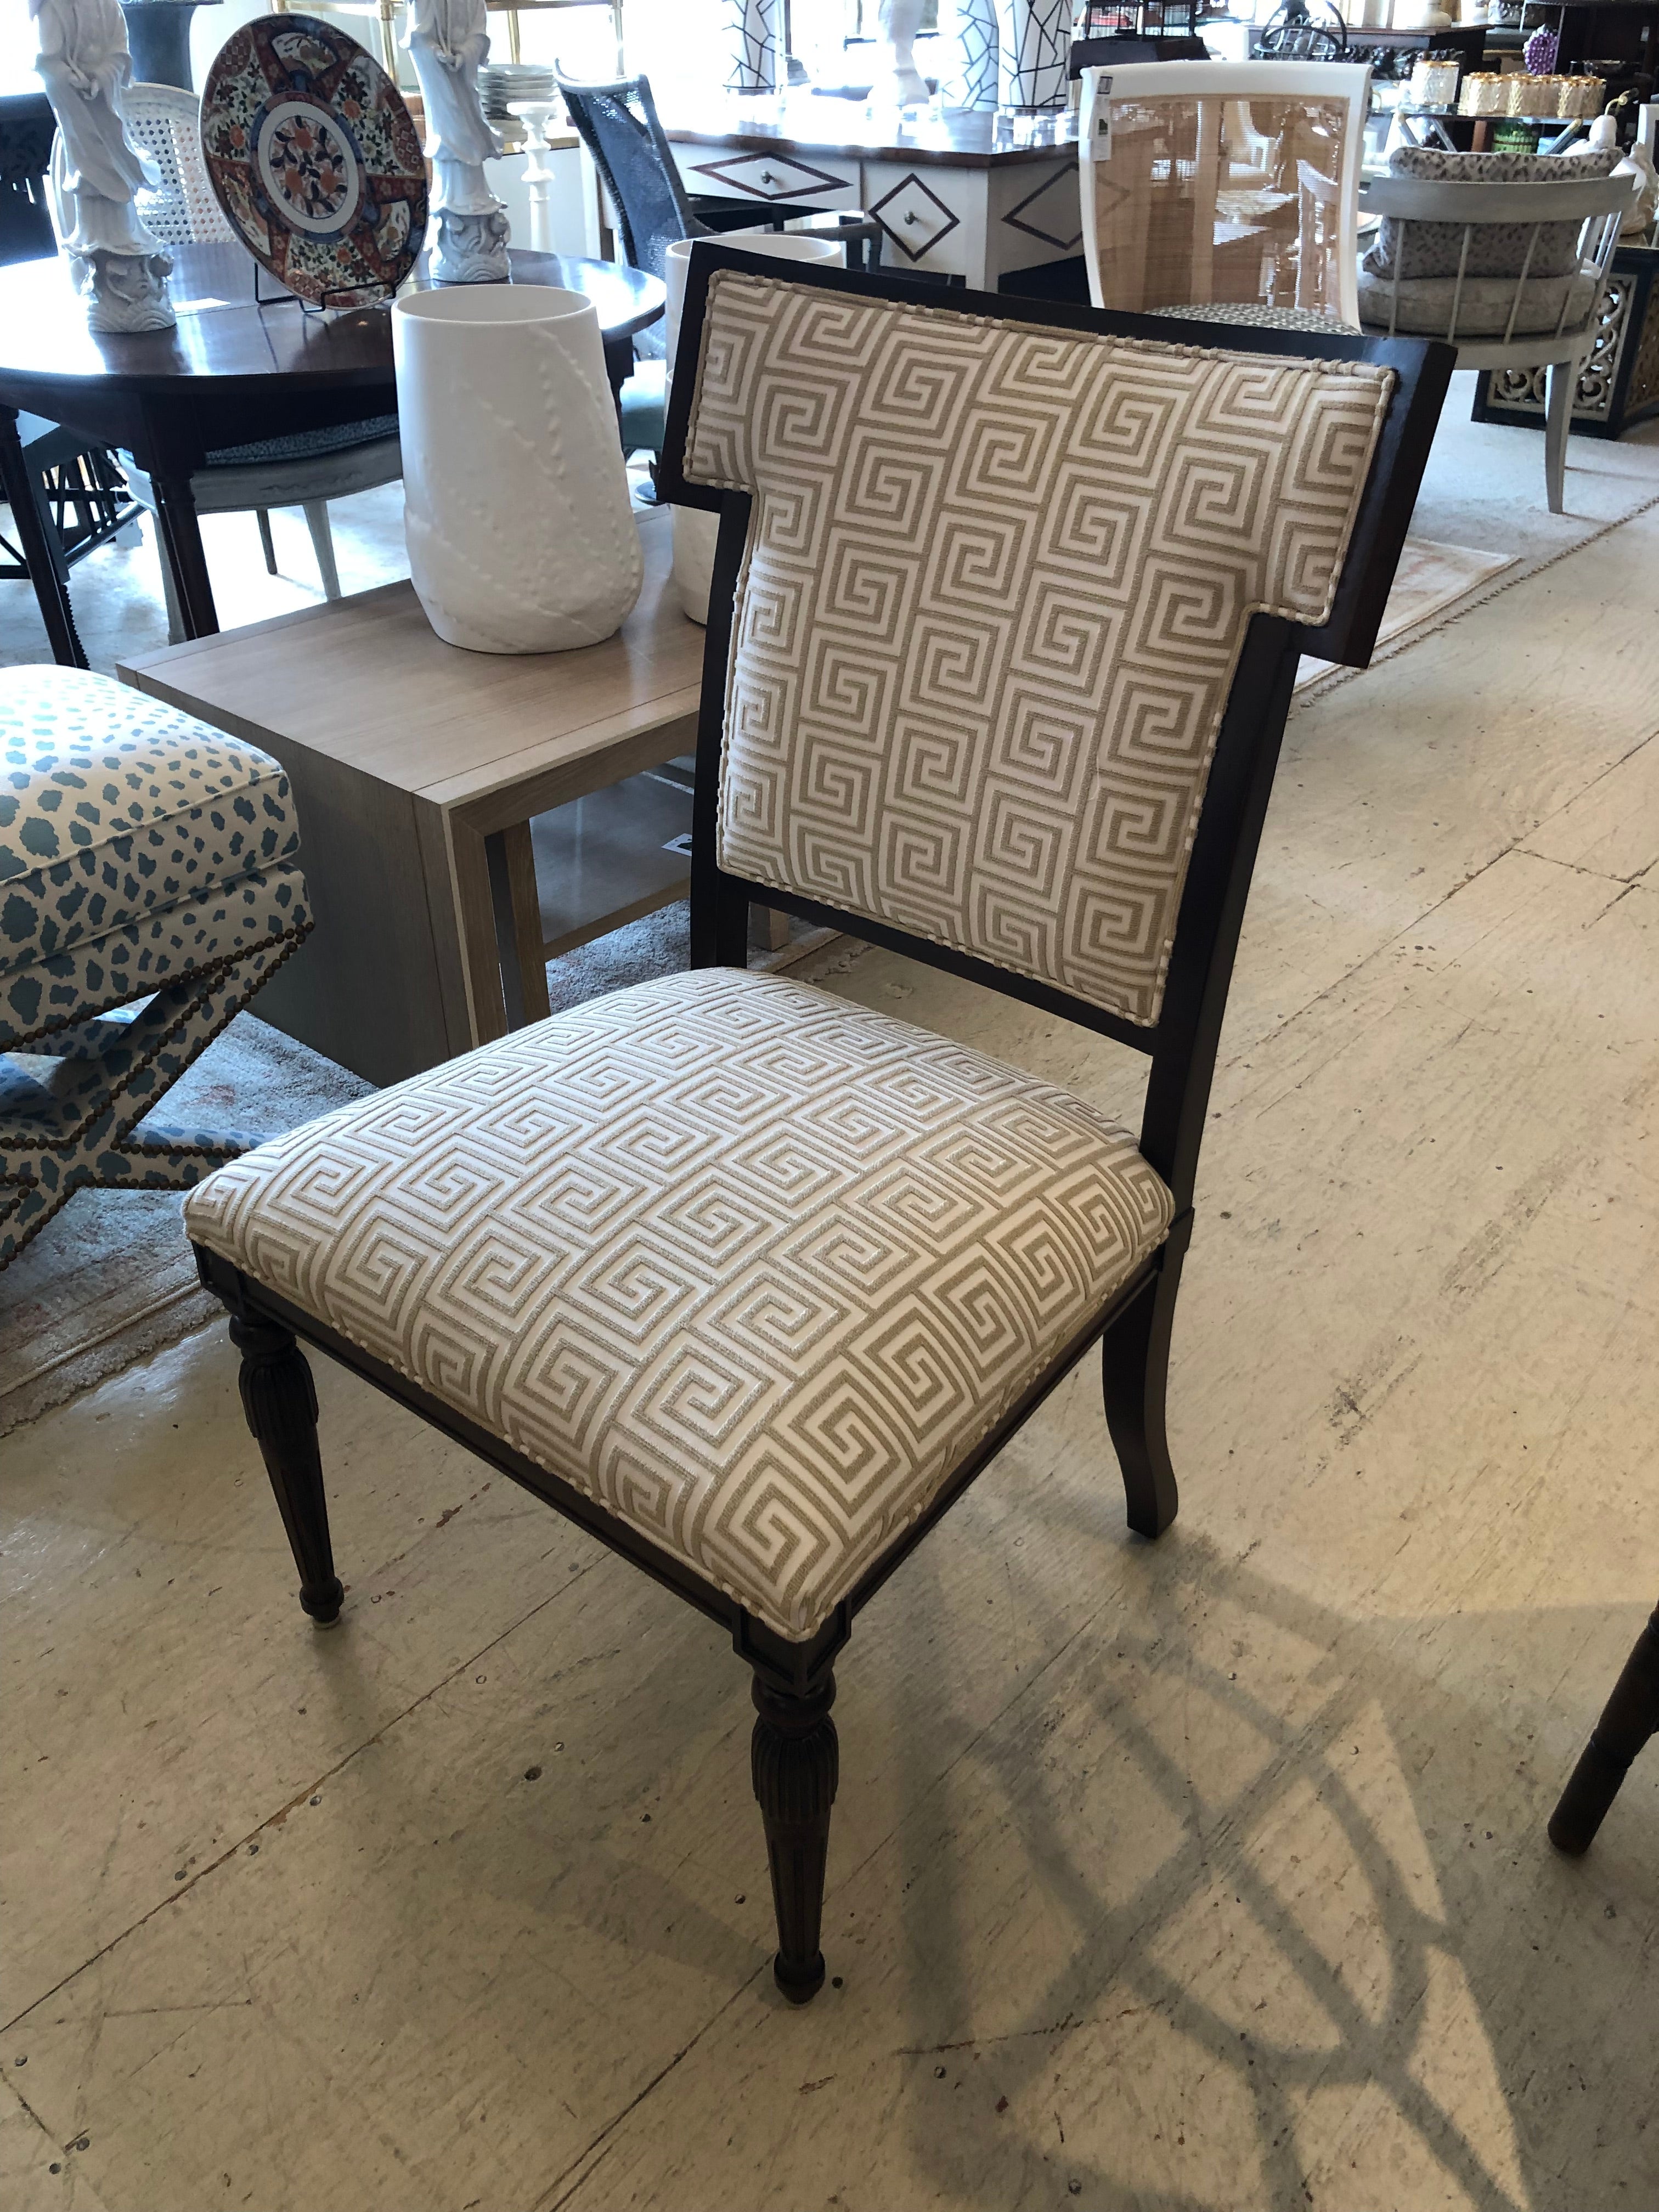 Stylish contemporary designer side or desk chair with a nod to the klismos design having superb plush cream and taupe Greek key upholstery. The design is raised and very luxurious. Very comfortable which makes it an ideal desk chair.